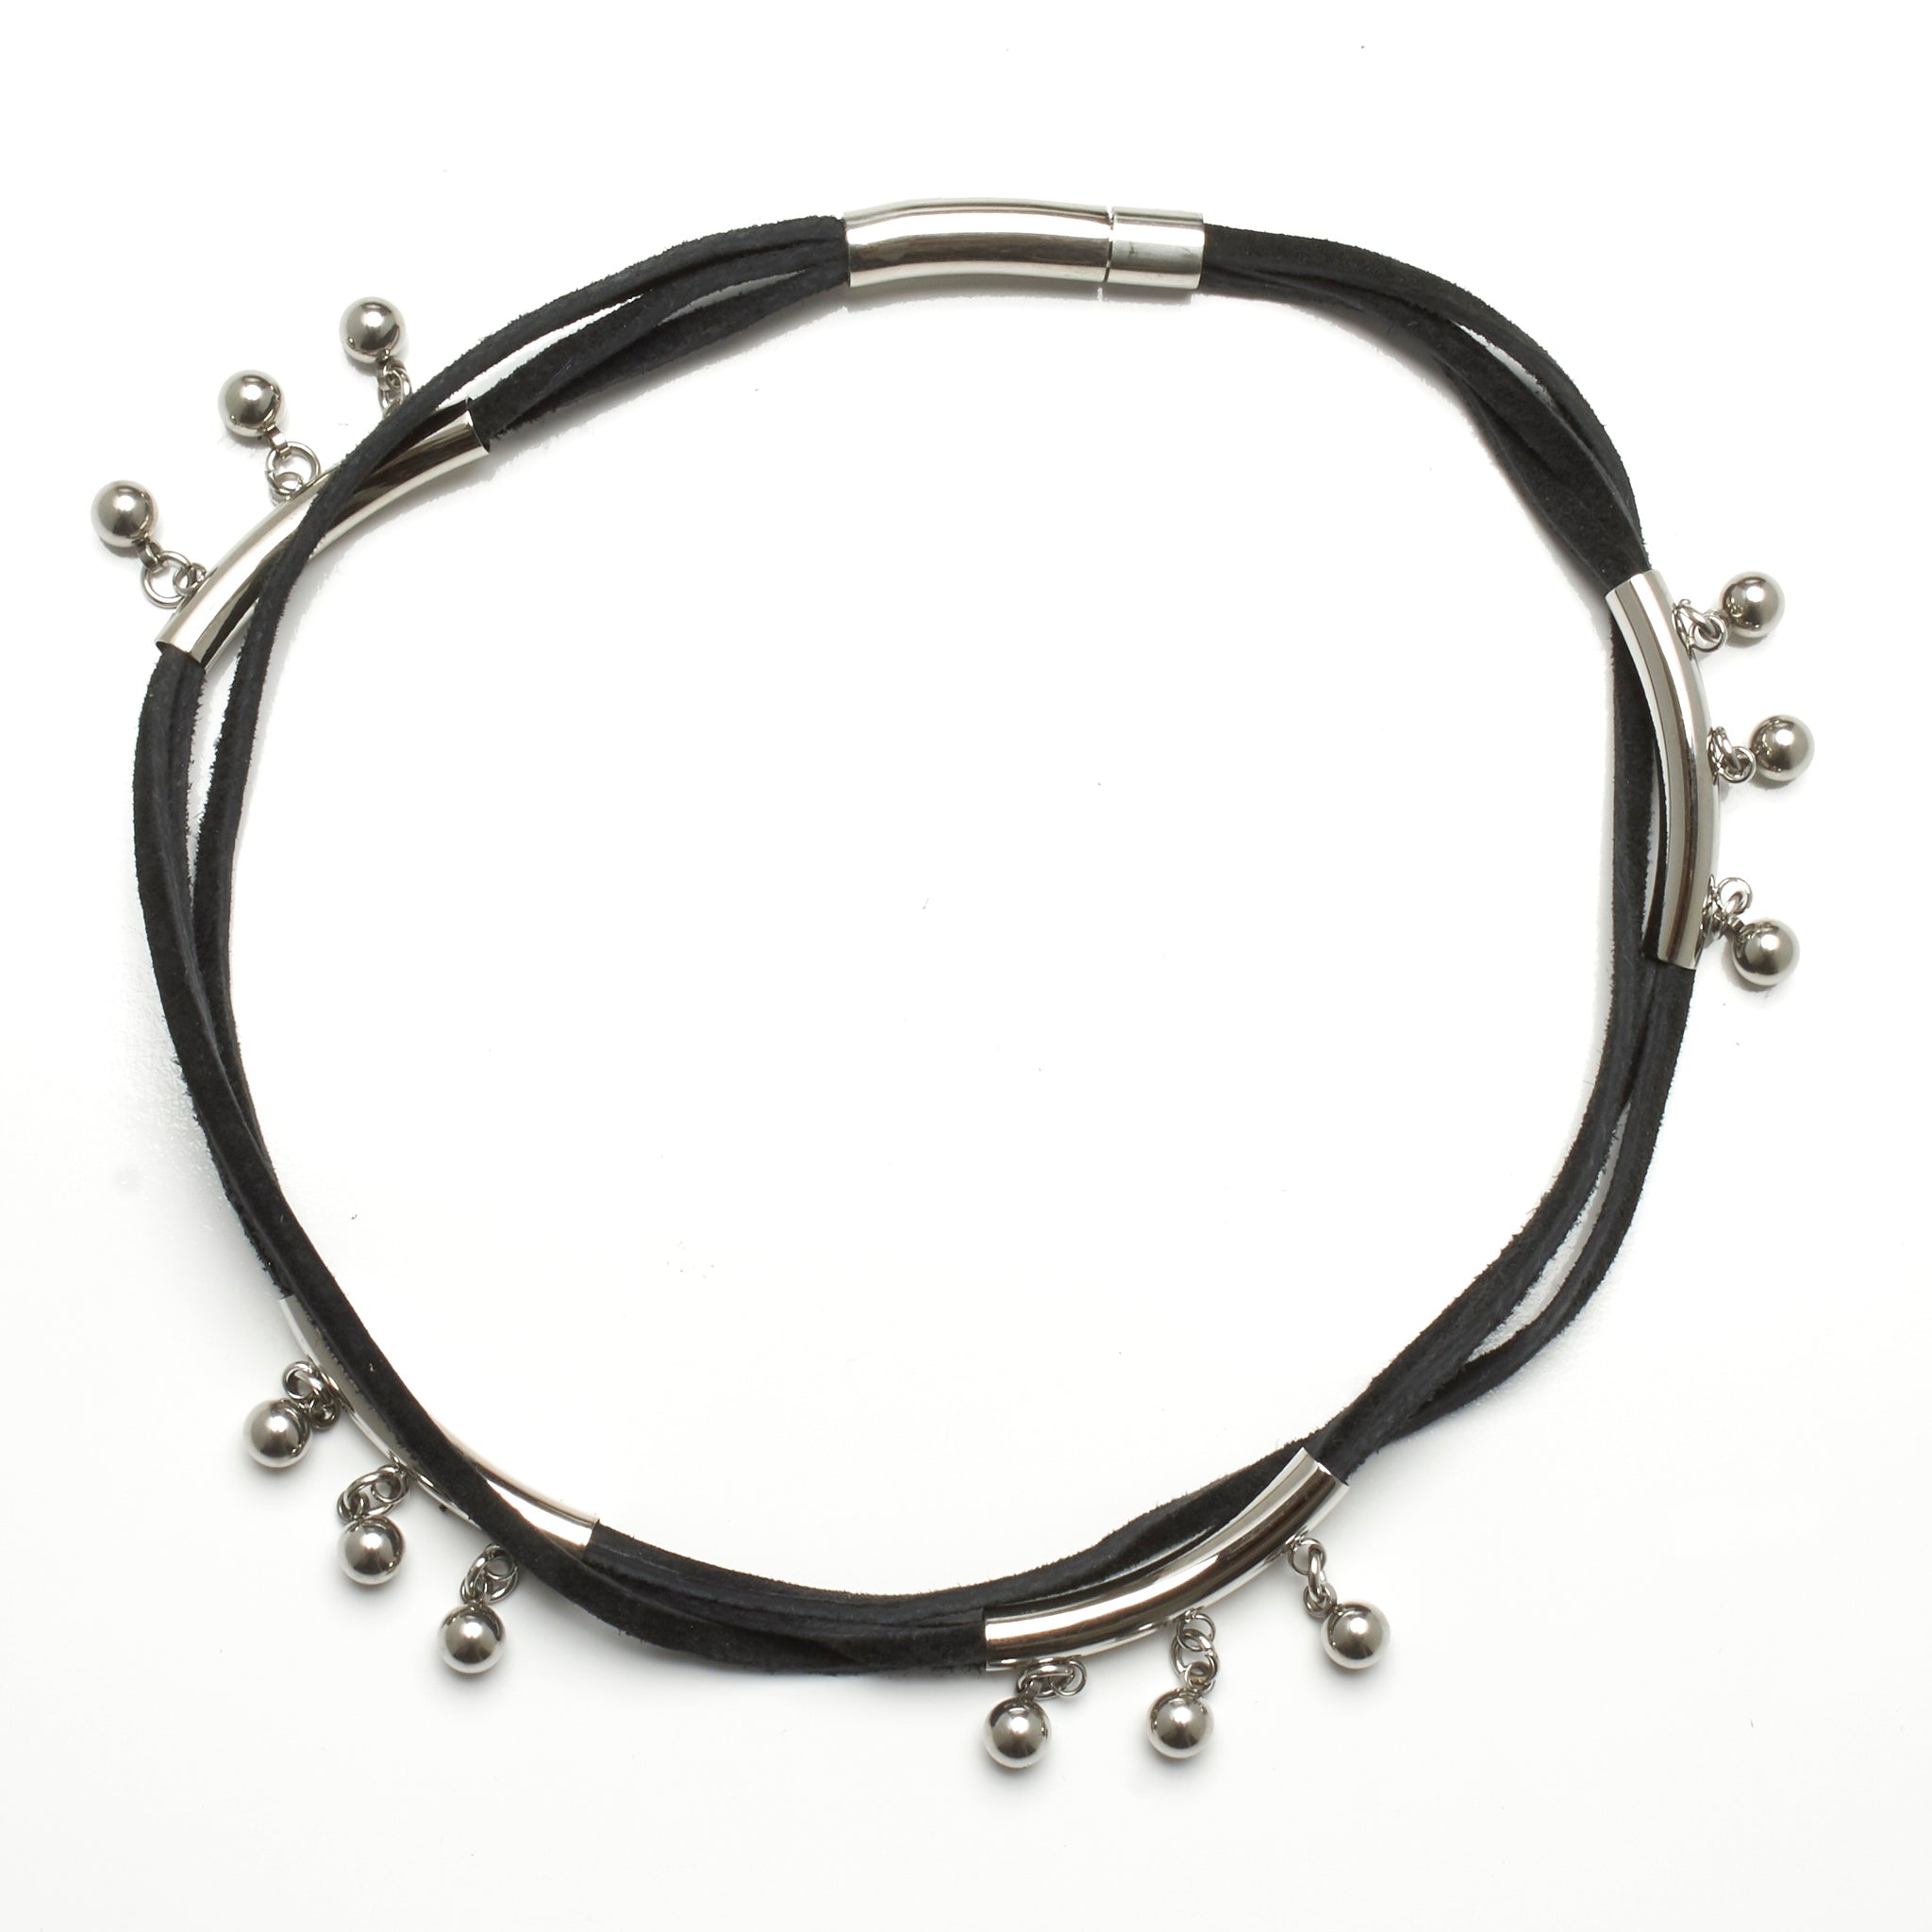 2 in 1 necklace and wraparound bracelet made of suede and stainless steel